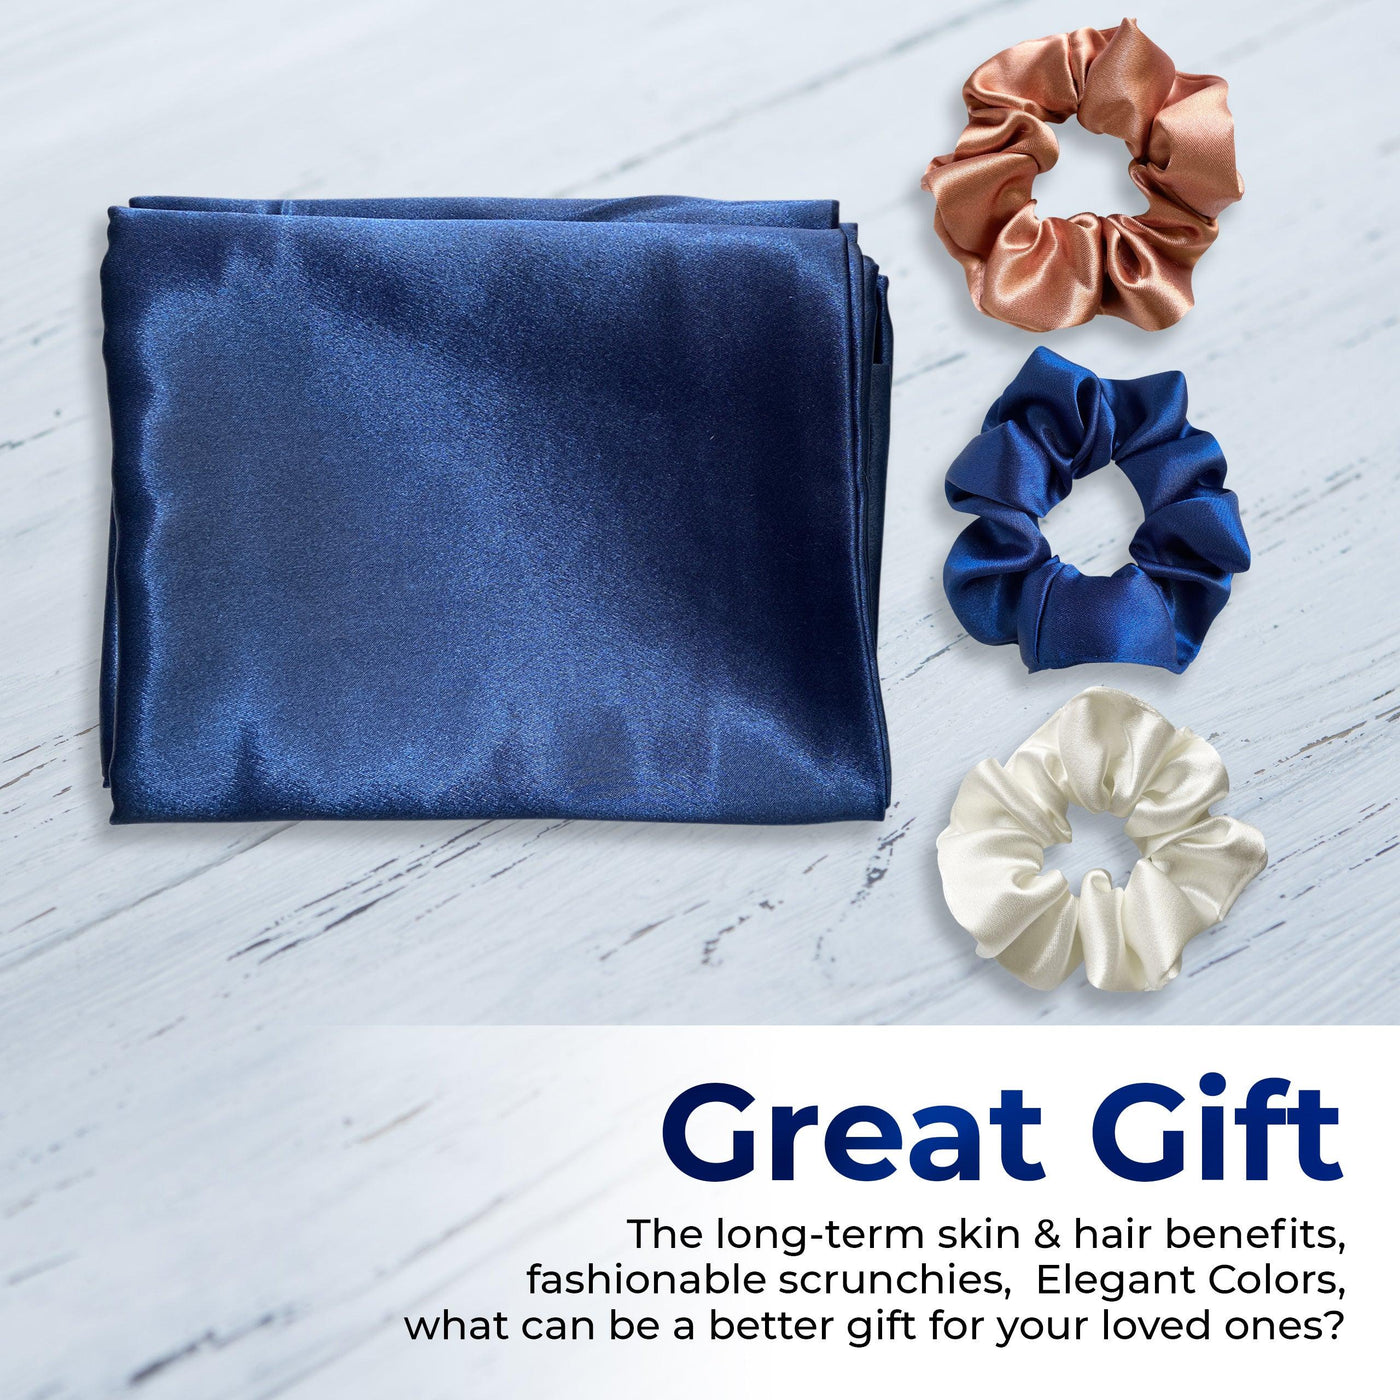 Luxury Satin Pillowcases - 18 x 27 inches | Pack of 2 Pillowcases + 3 Scrunchies | Navy Blue - silvrbear